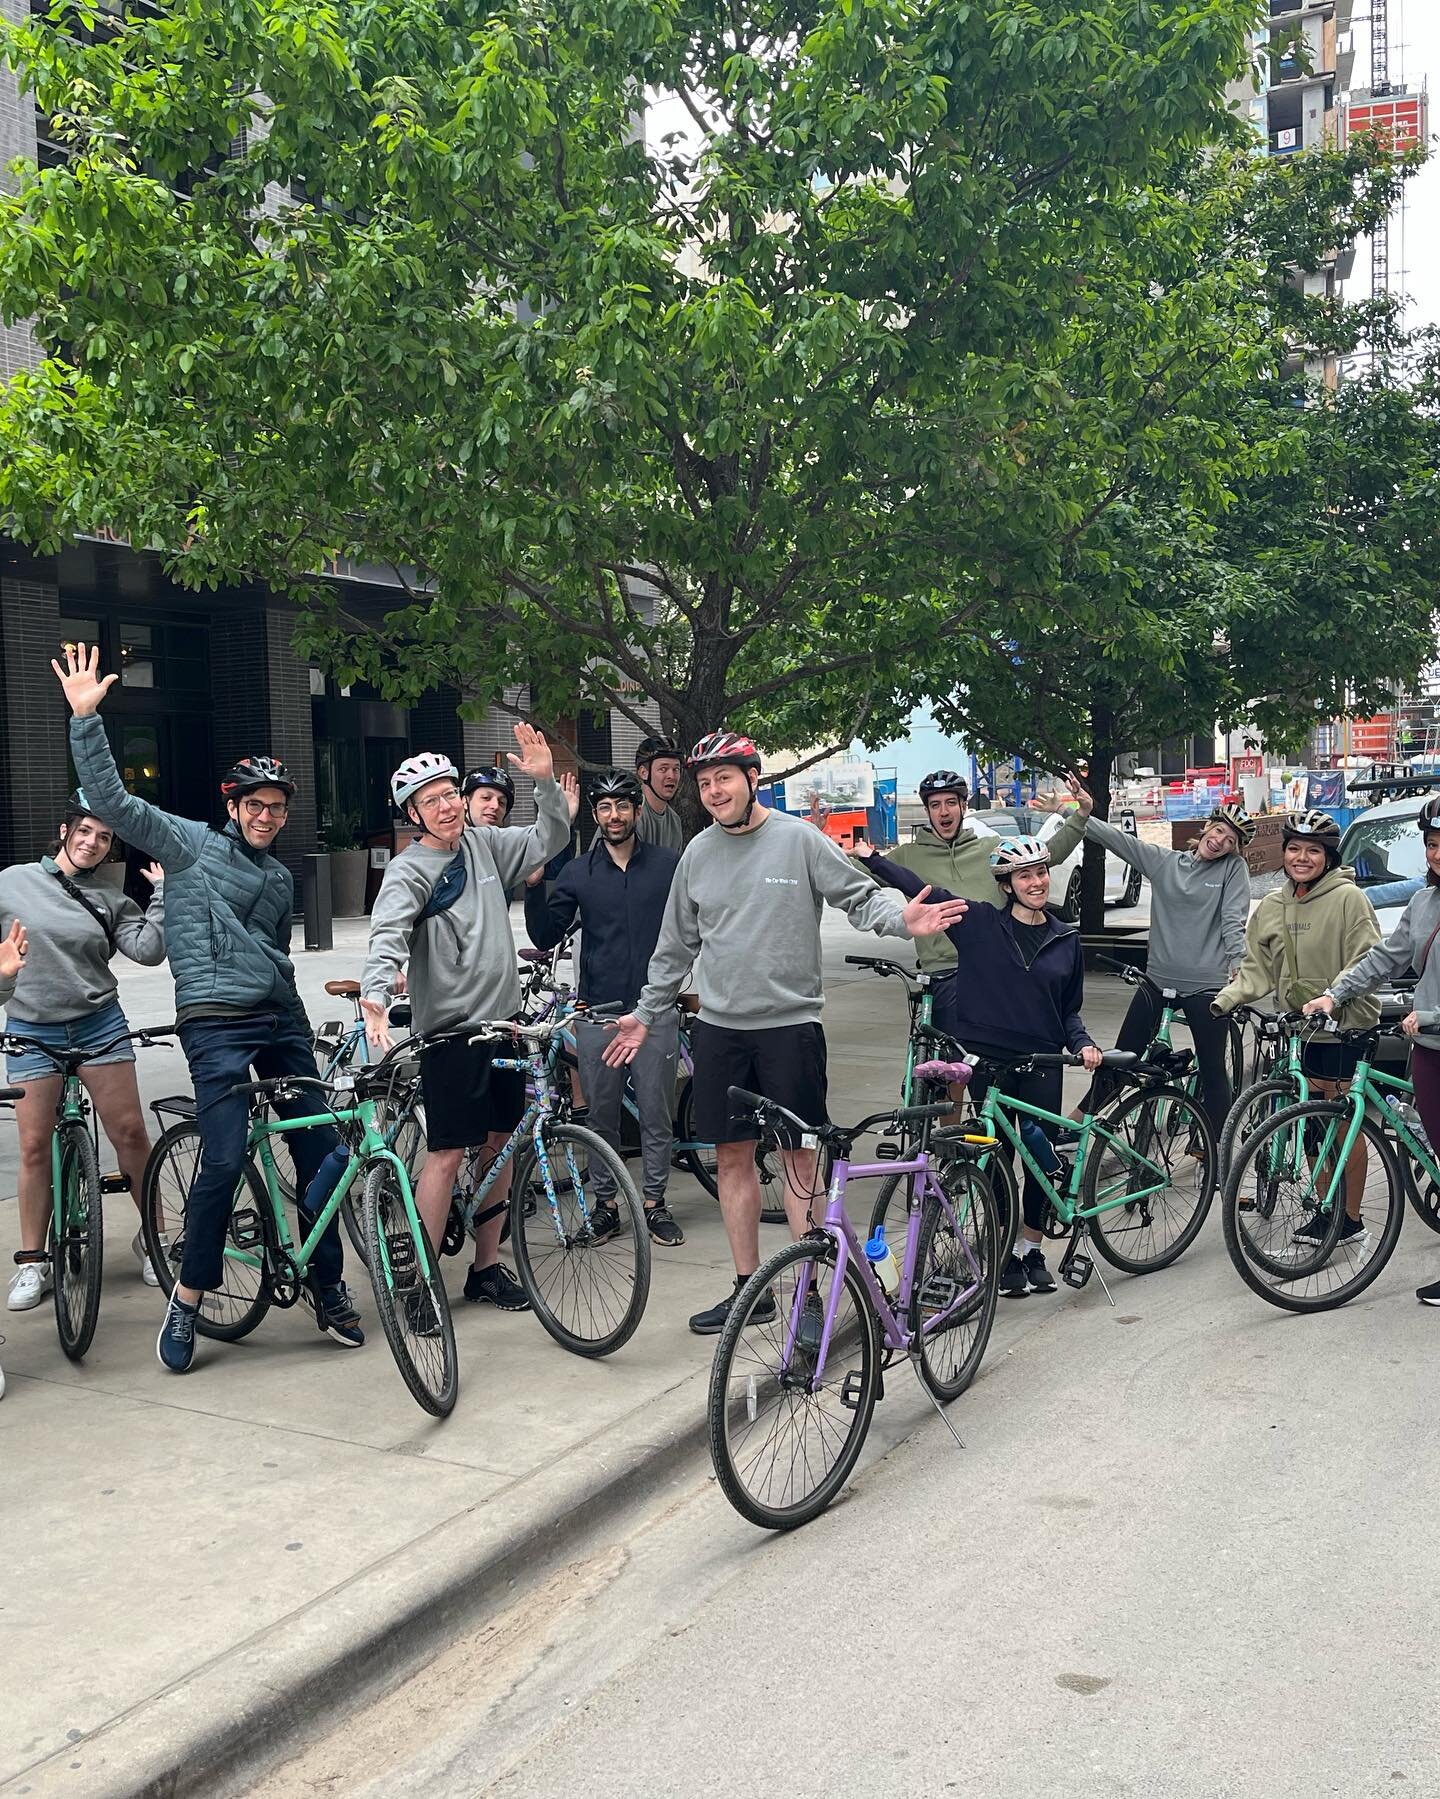 Spring has sprung! And now is the best time of year to get out &amp; ride in Austin. To encourage you to saddle up, we&rsquo;re offering 10% off all our bike tours &amp; rentals now thru May 1st. Just use promo code: SPRING10 when you book on our web